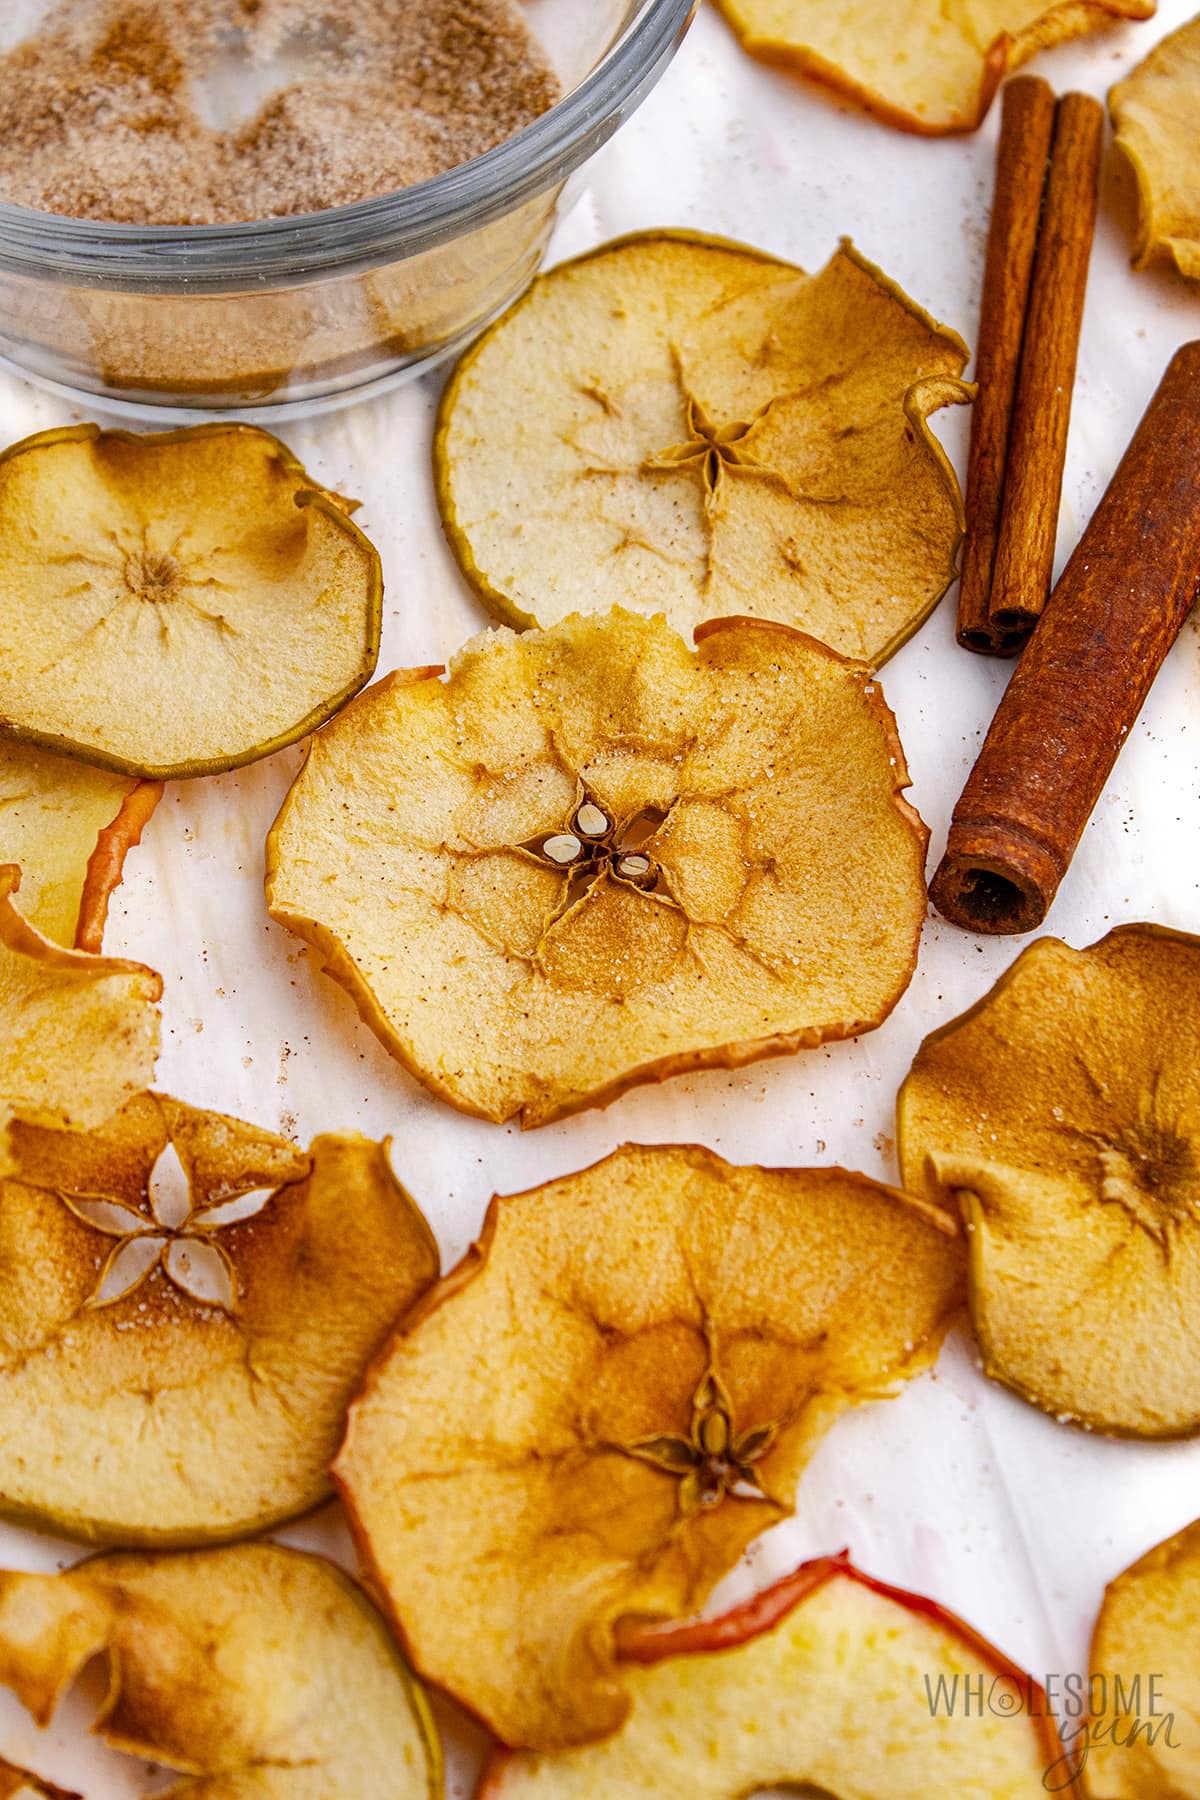 Apple chips recipe on parchment next to cinnamon sticks.